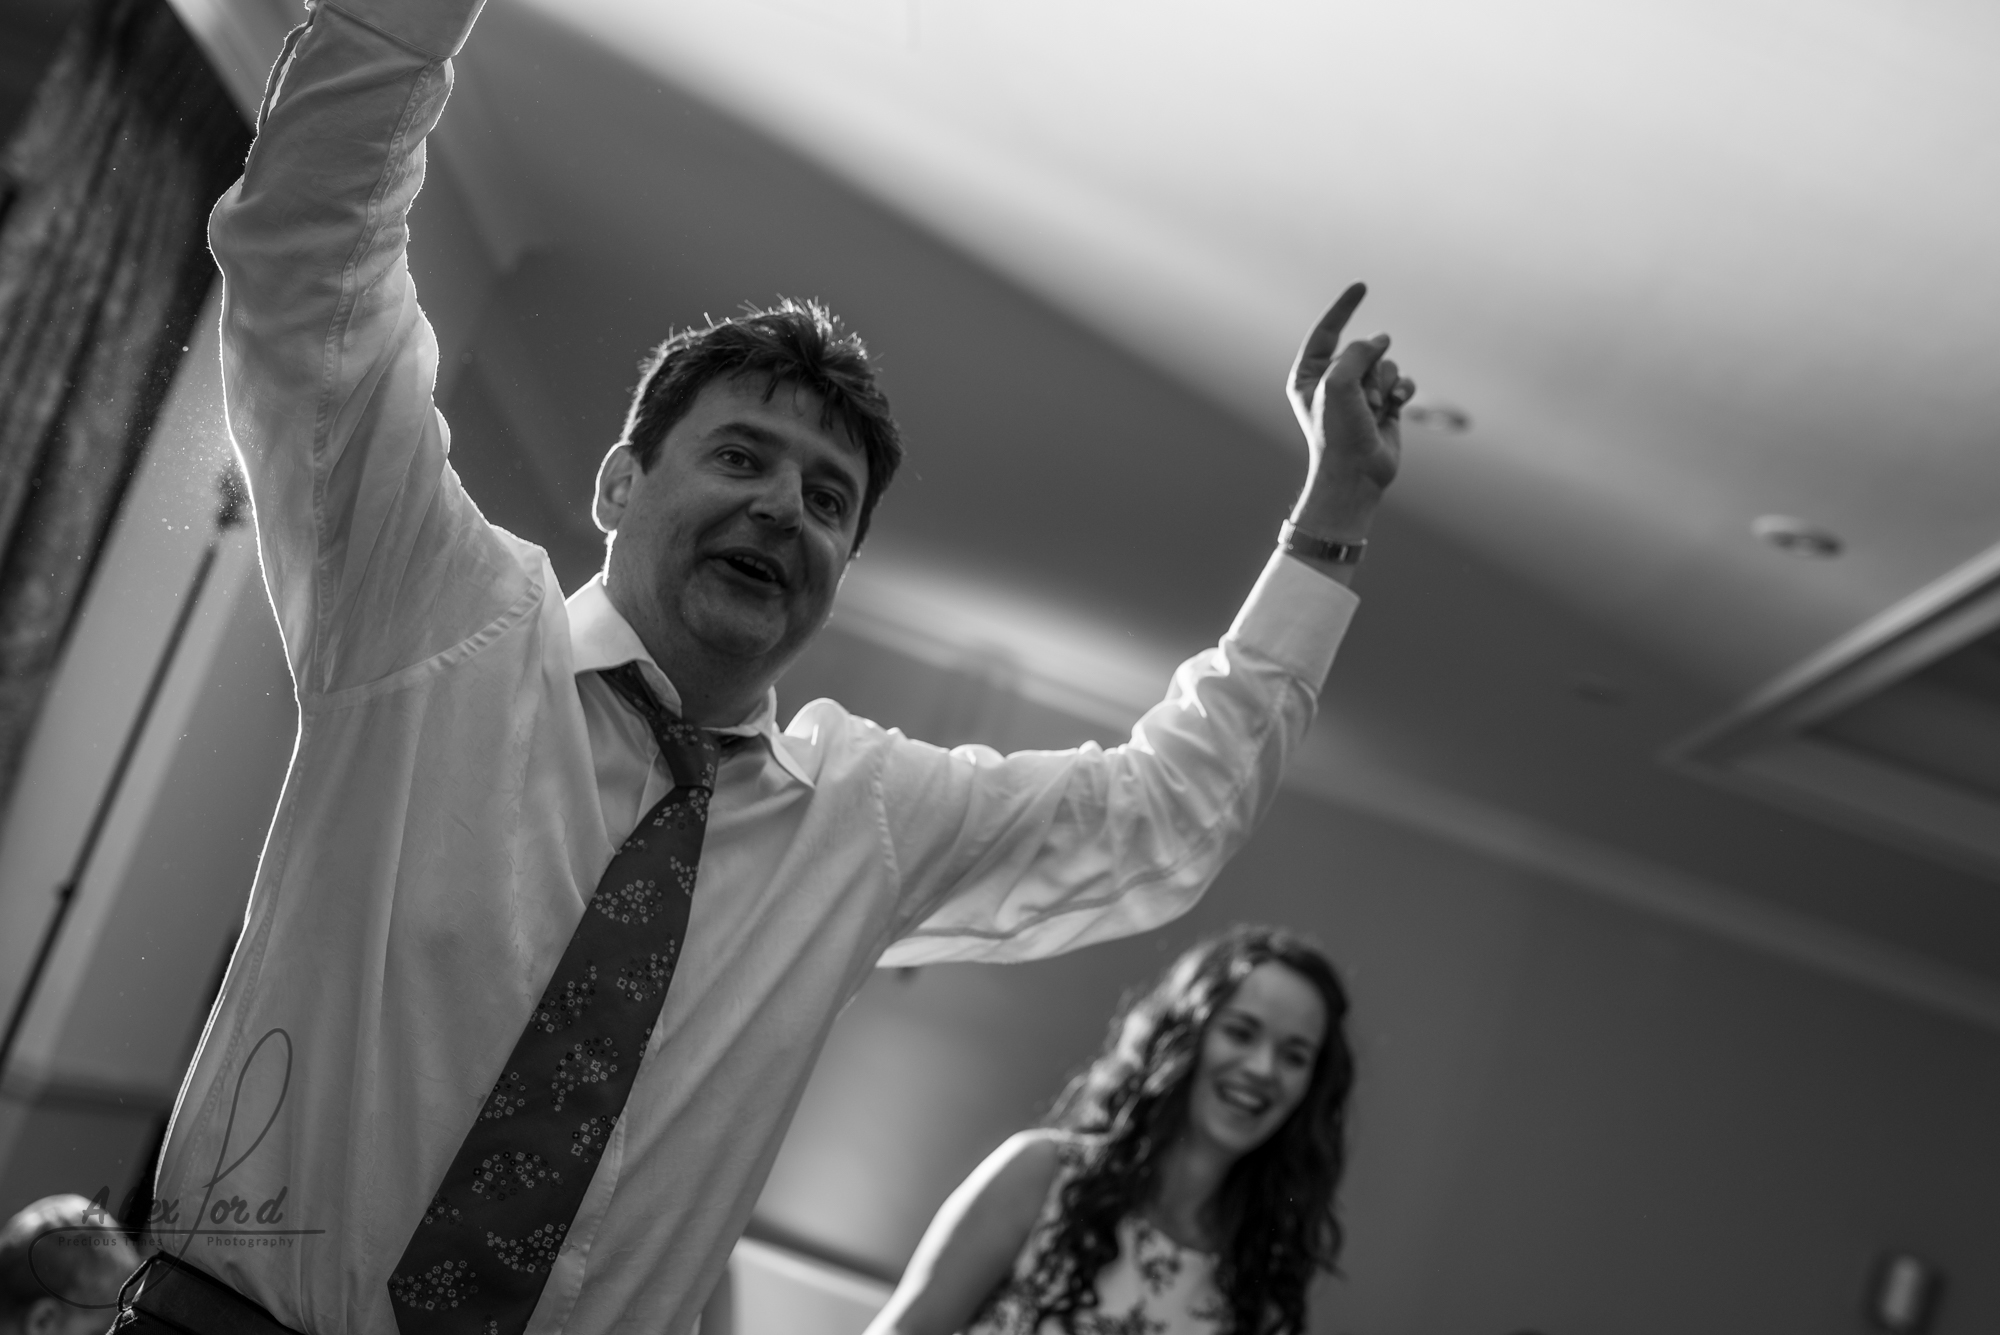 a male wedding guest puts his arms up in the air